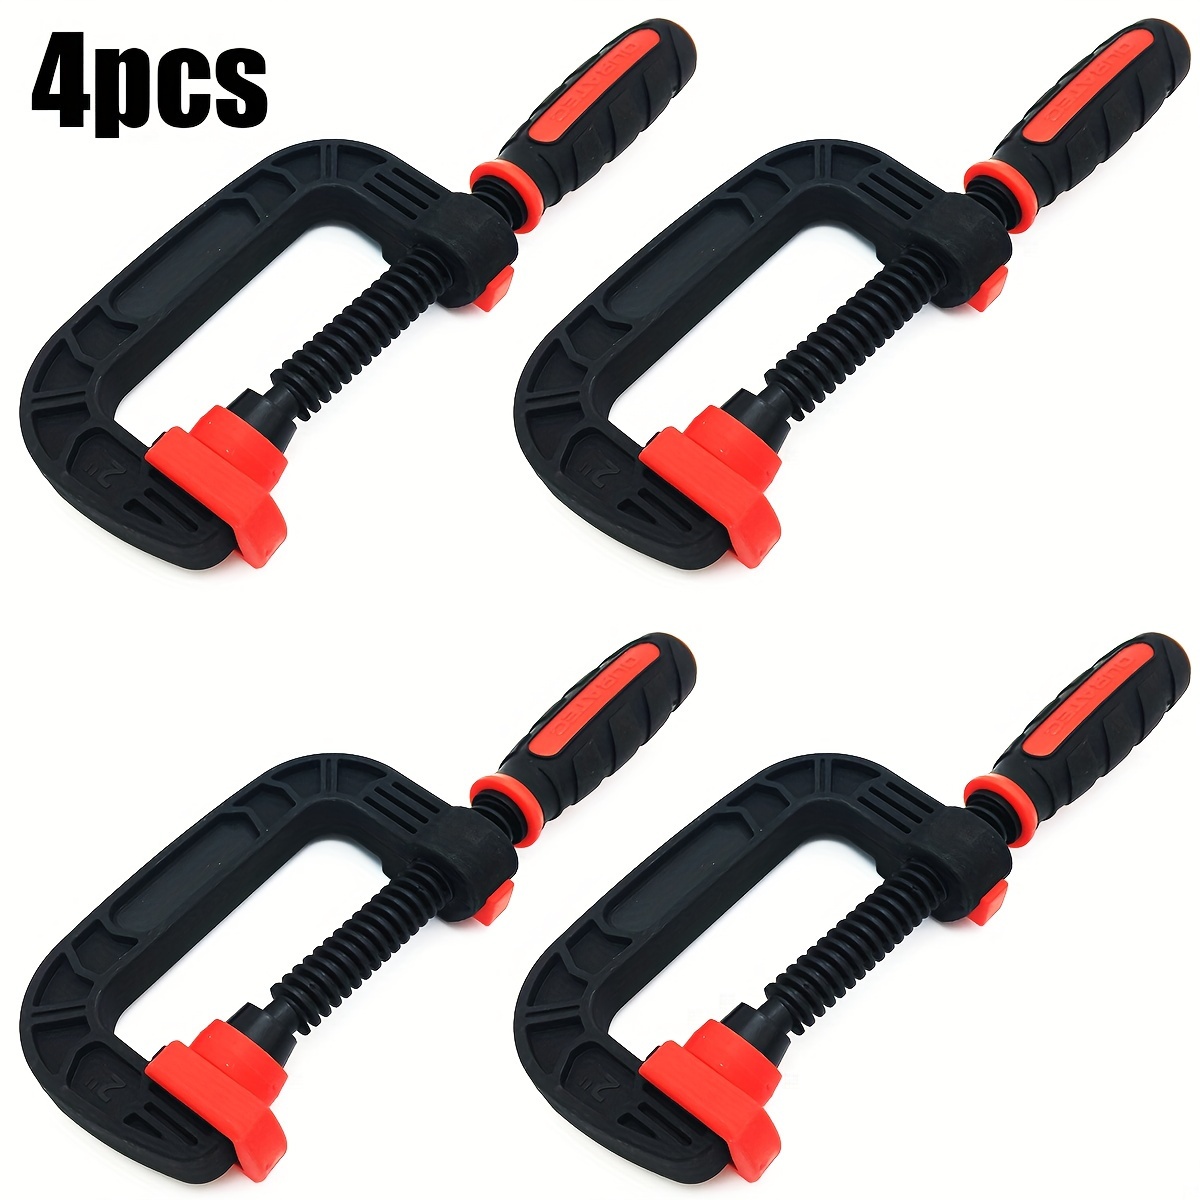 2&3 Inch C-Clamp Set, Clamps for Woodworking,Strong Clamping Force  QUICK-GRIP Plastic Rubber C Clamp,Ideal for most DIY, Woodworking and  Household